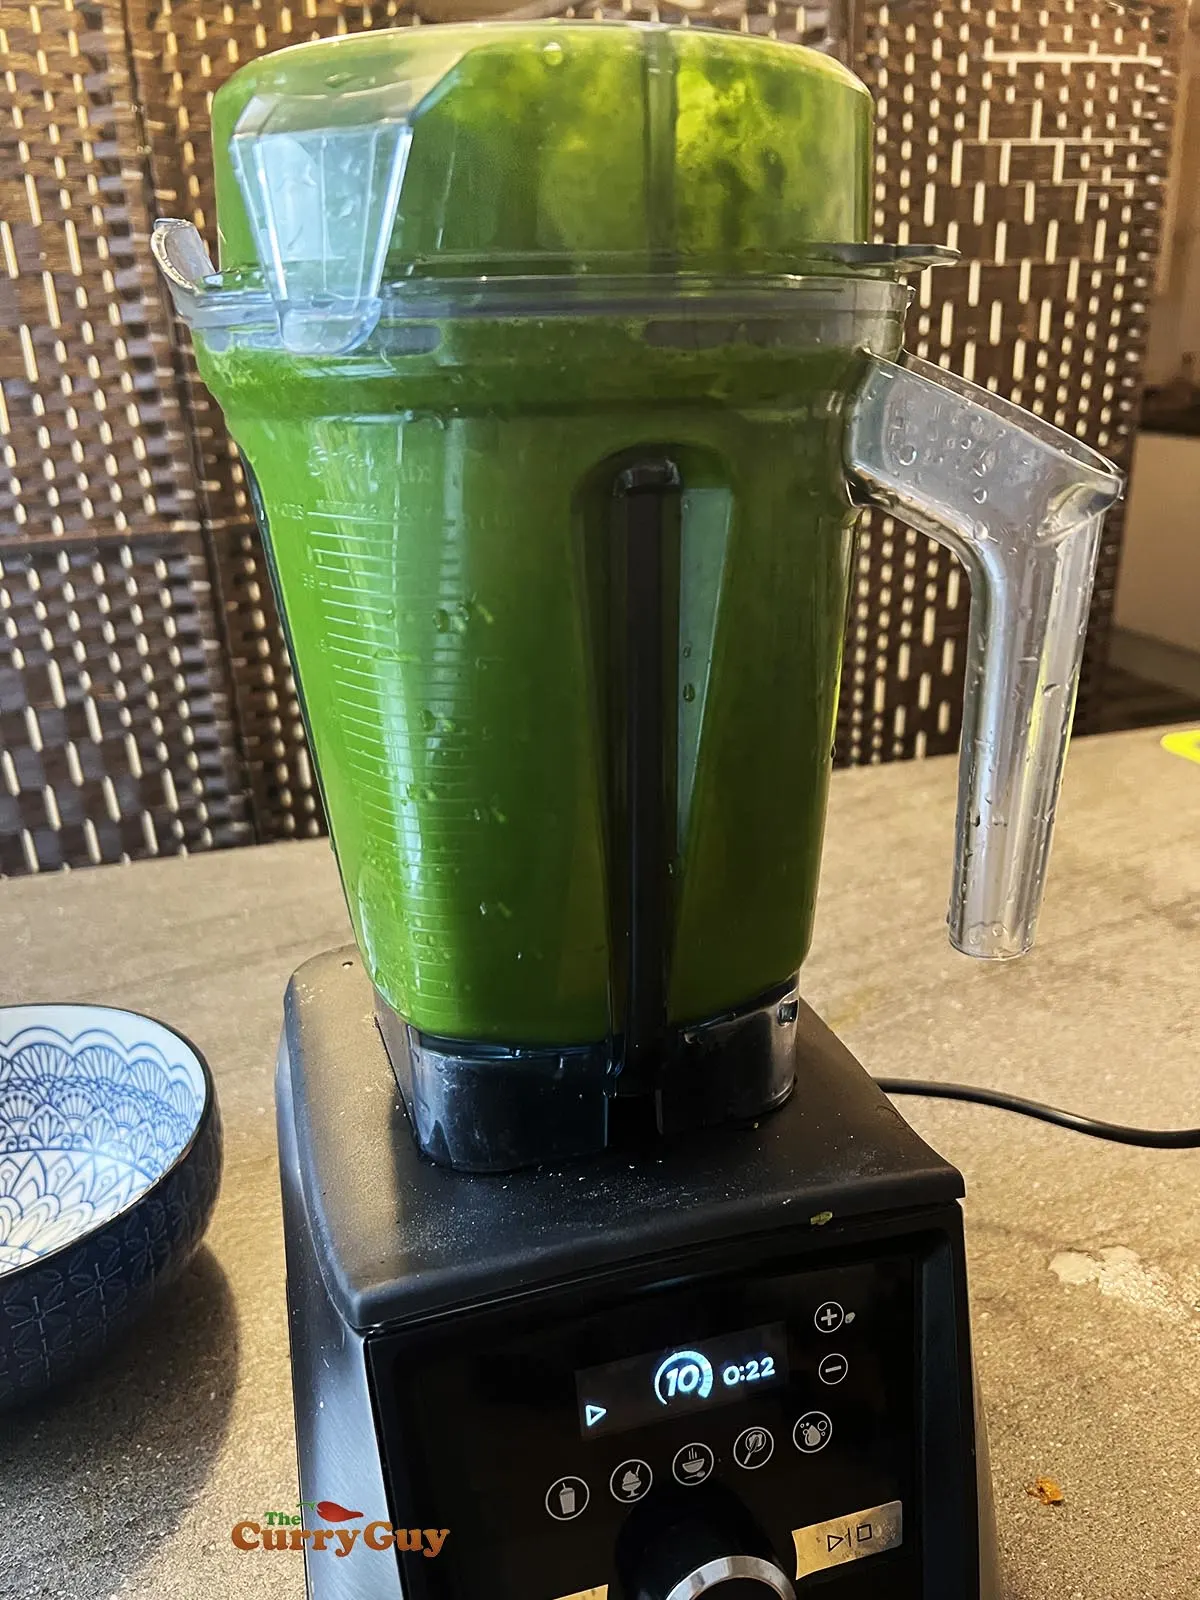 Blending spinach puree